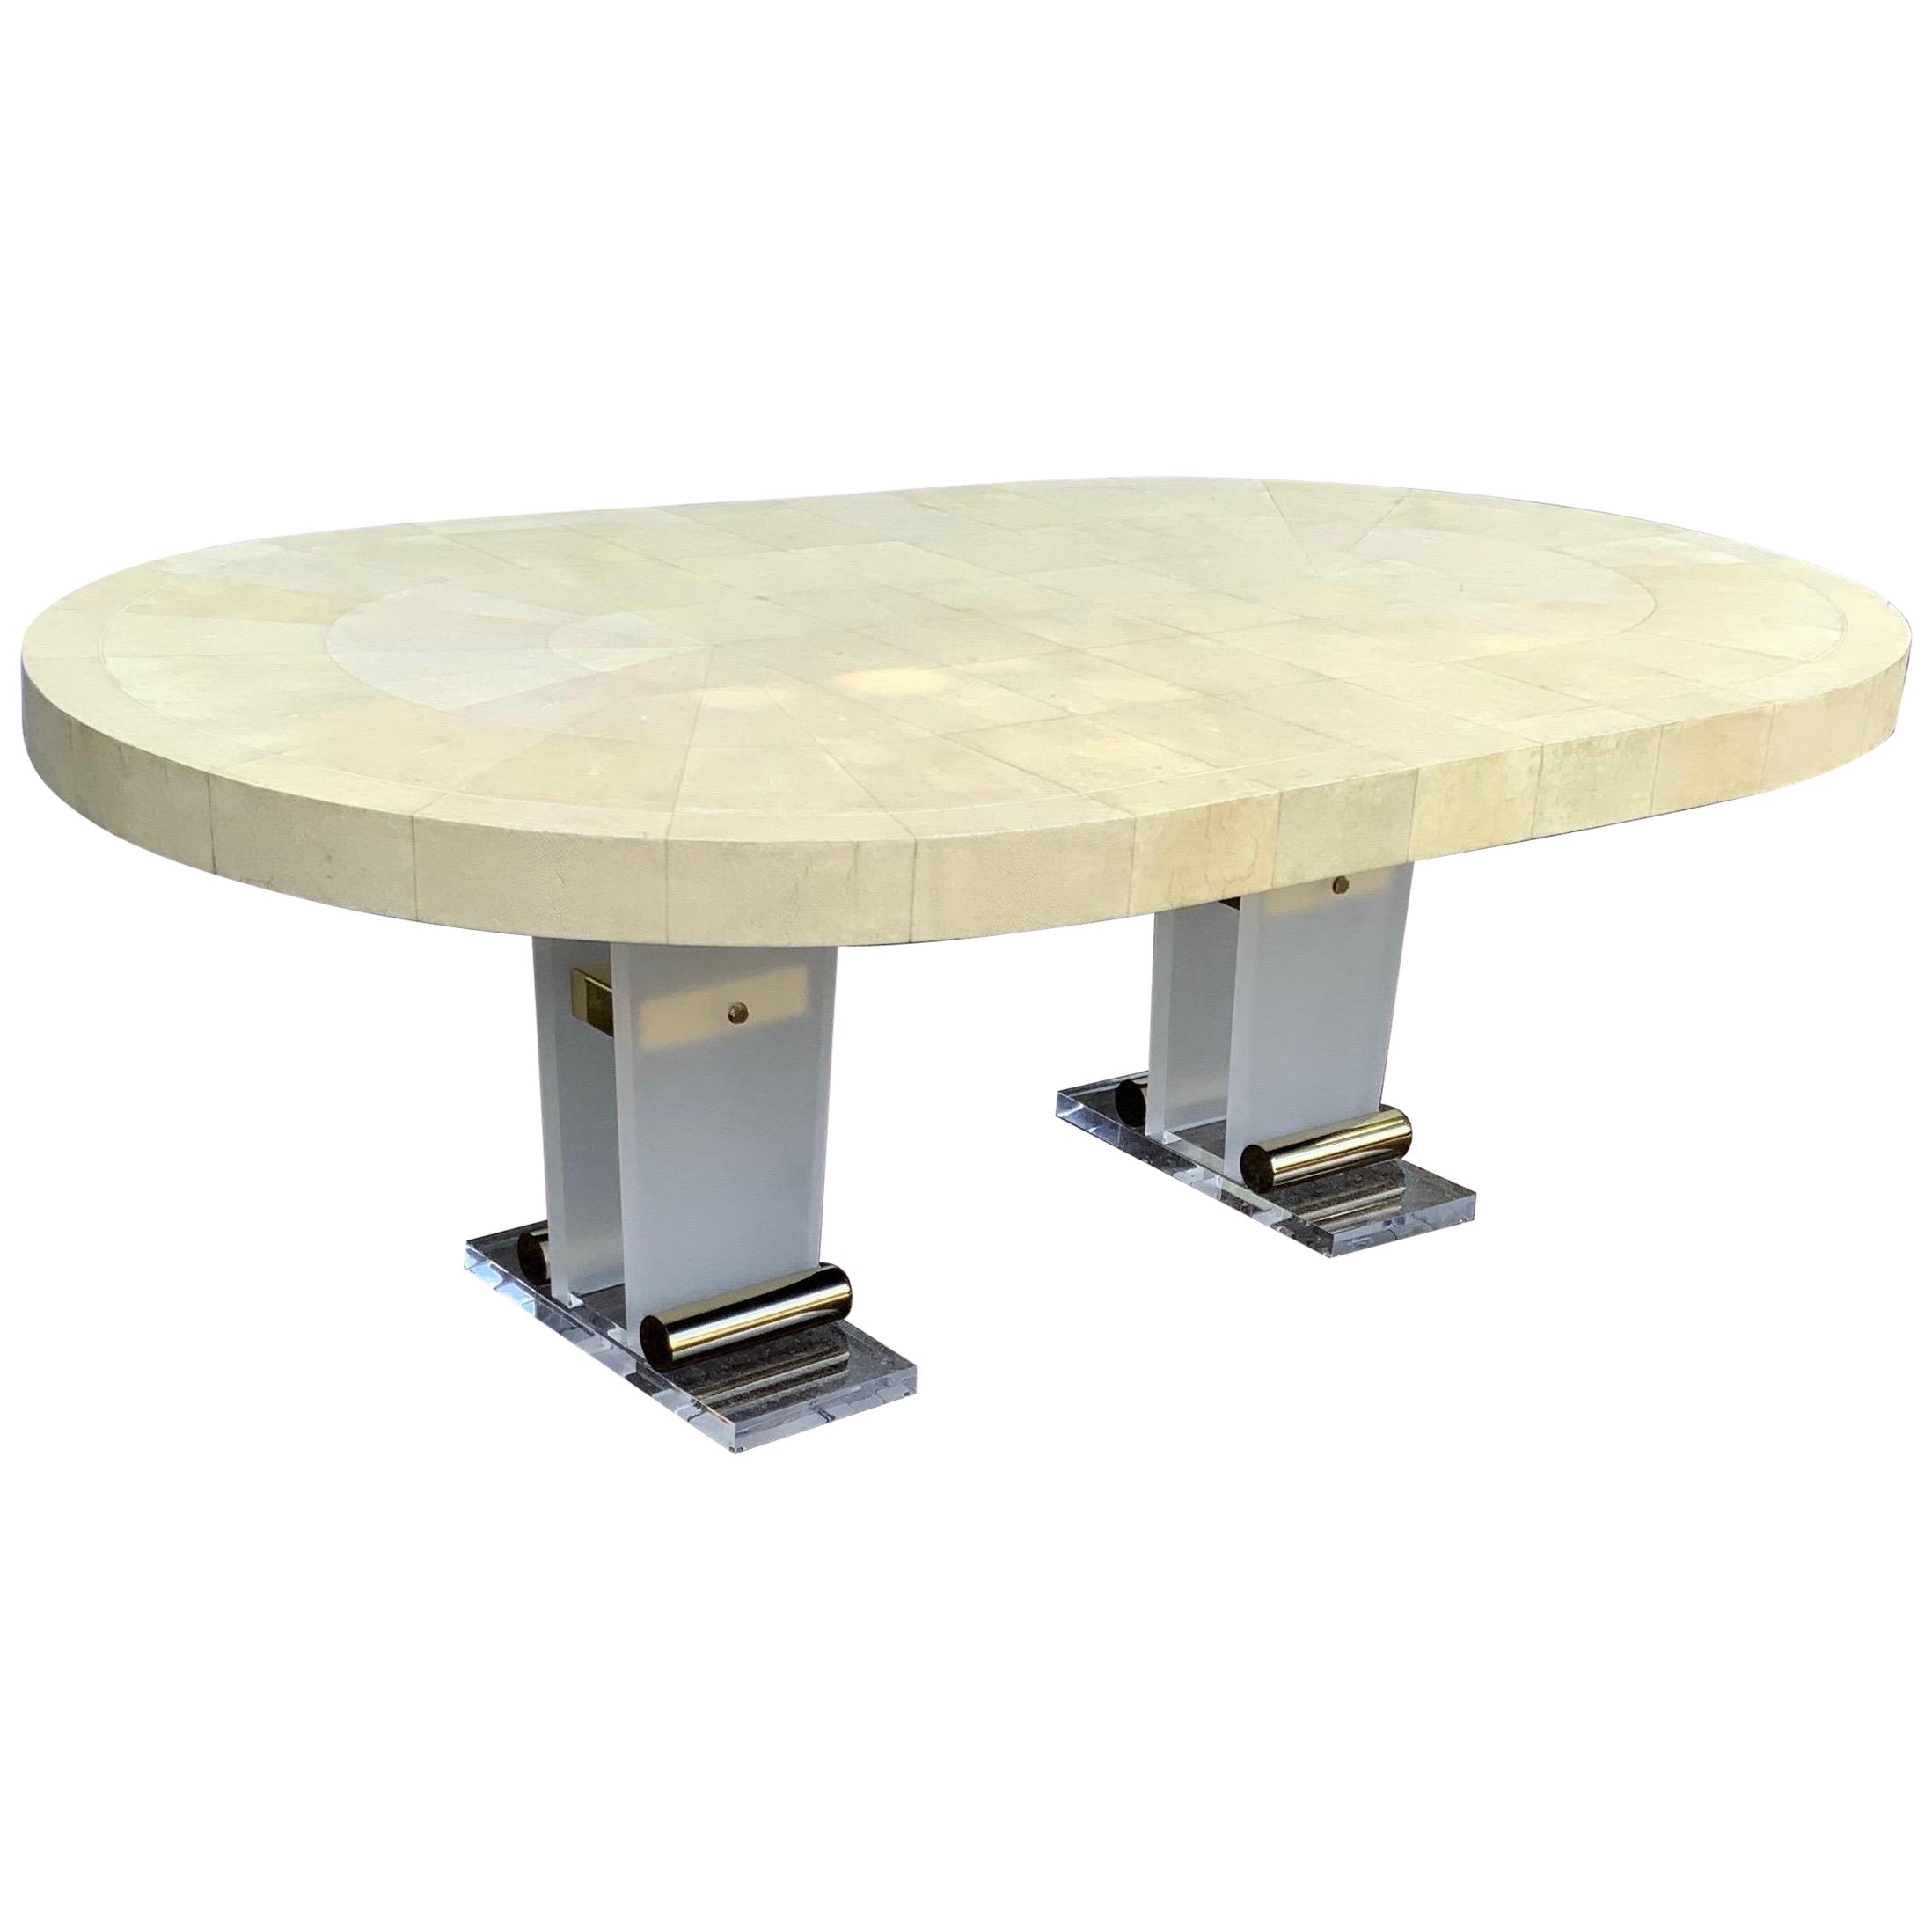 Ron Seff Shagreen and Lucite Dining Room Table